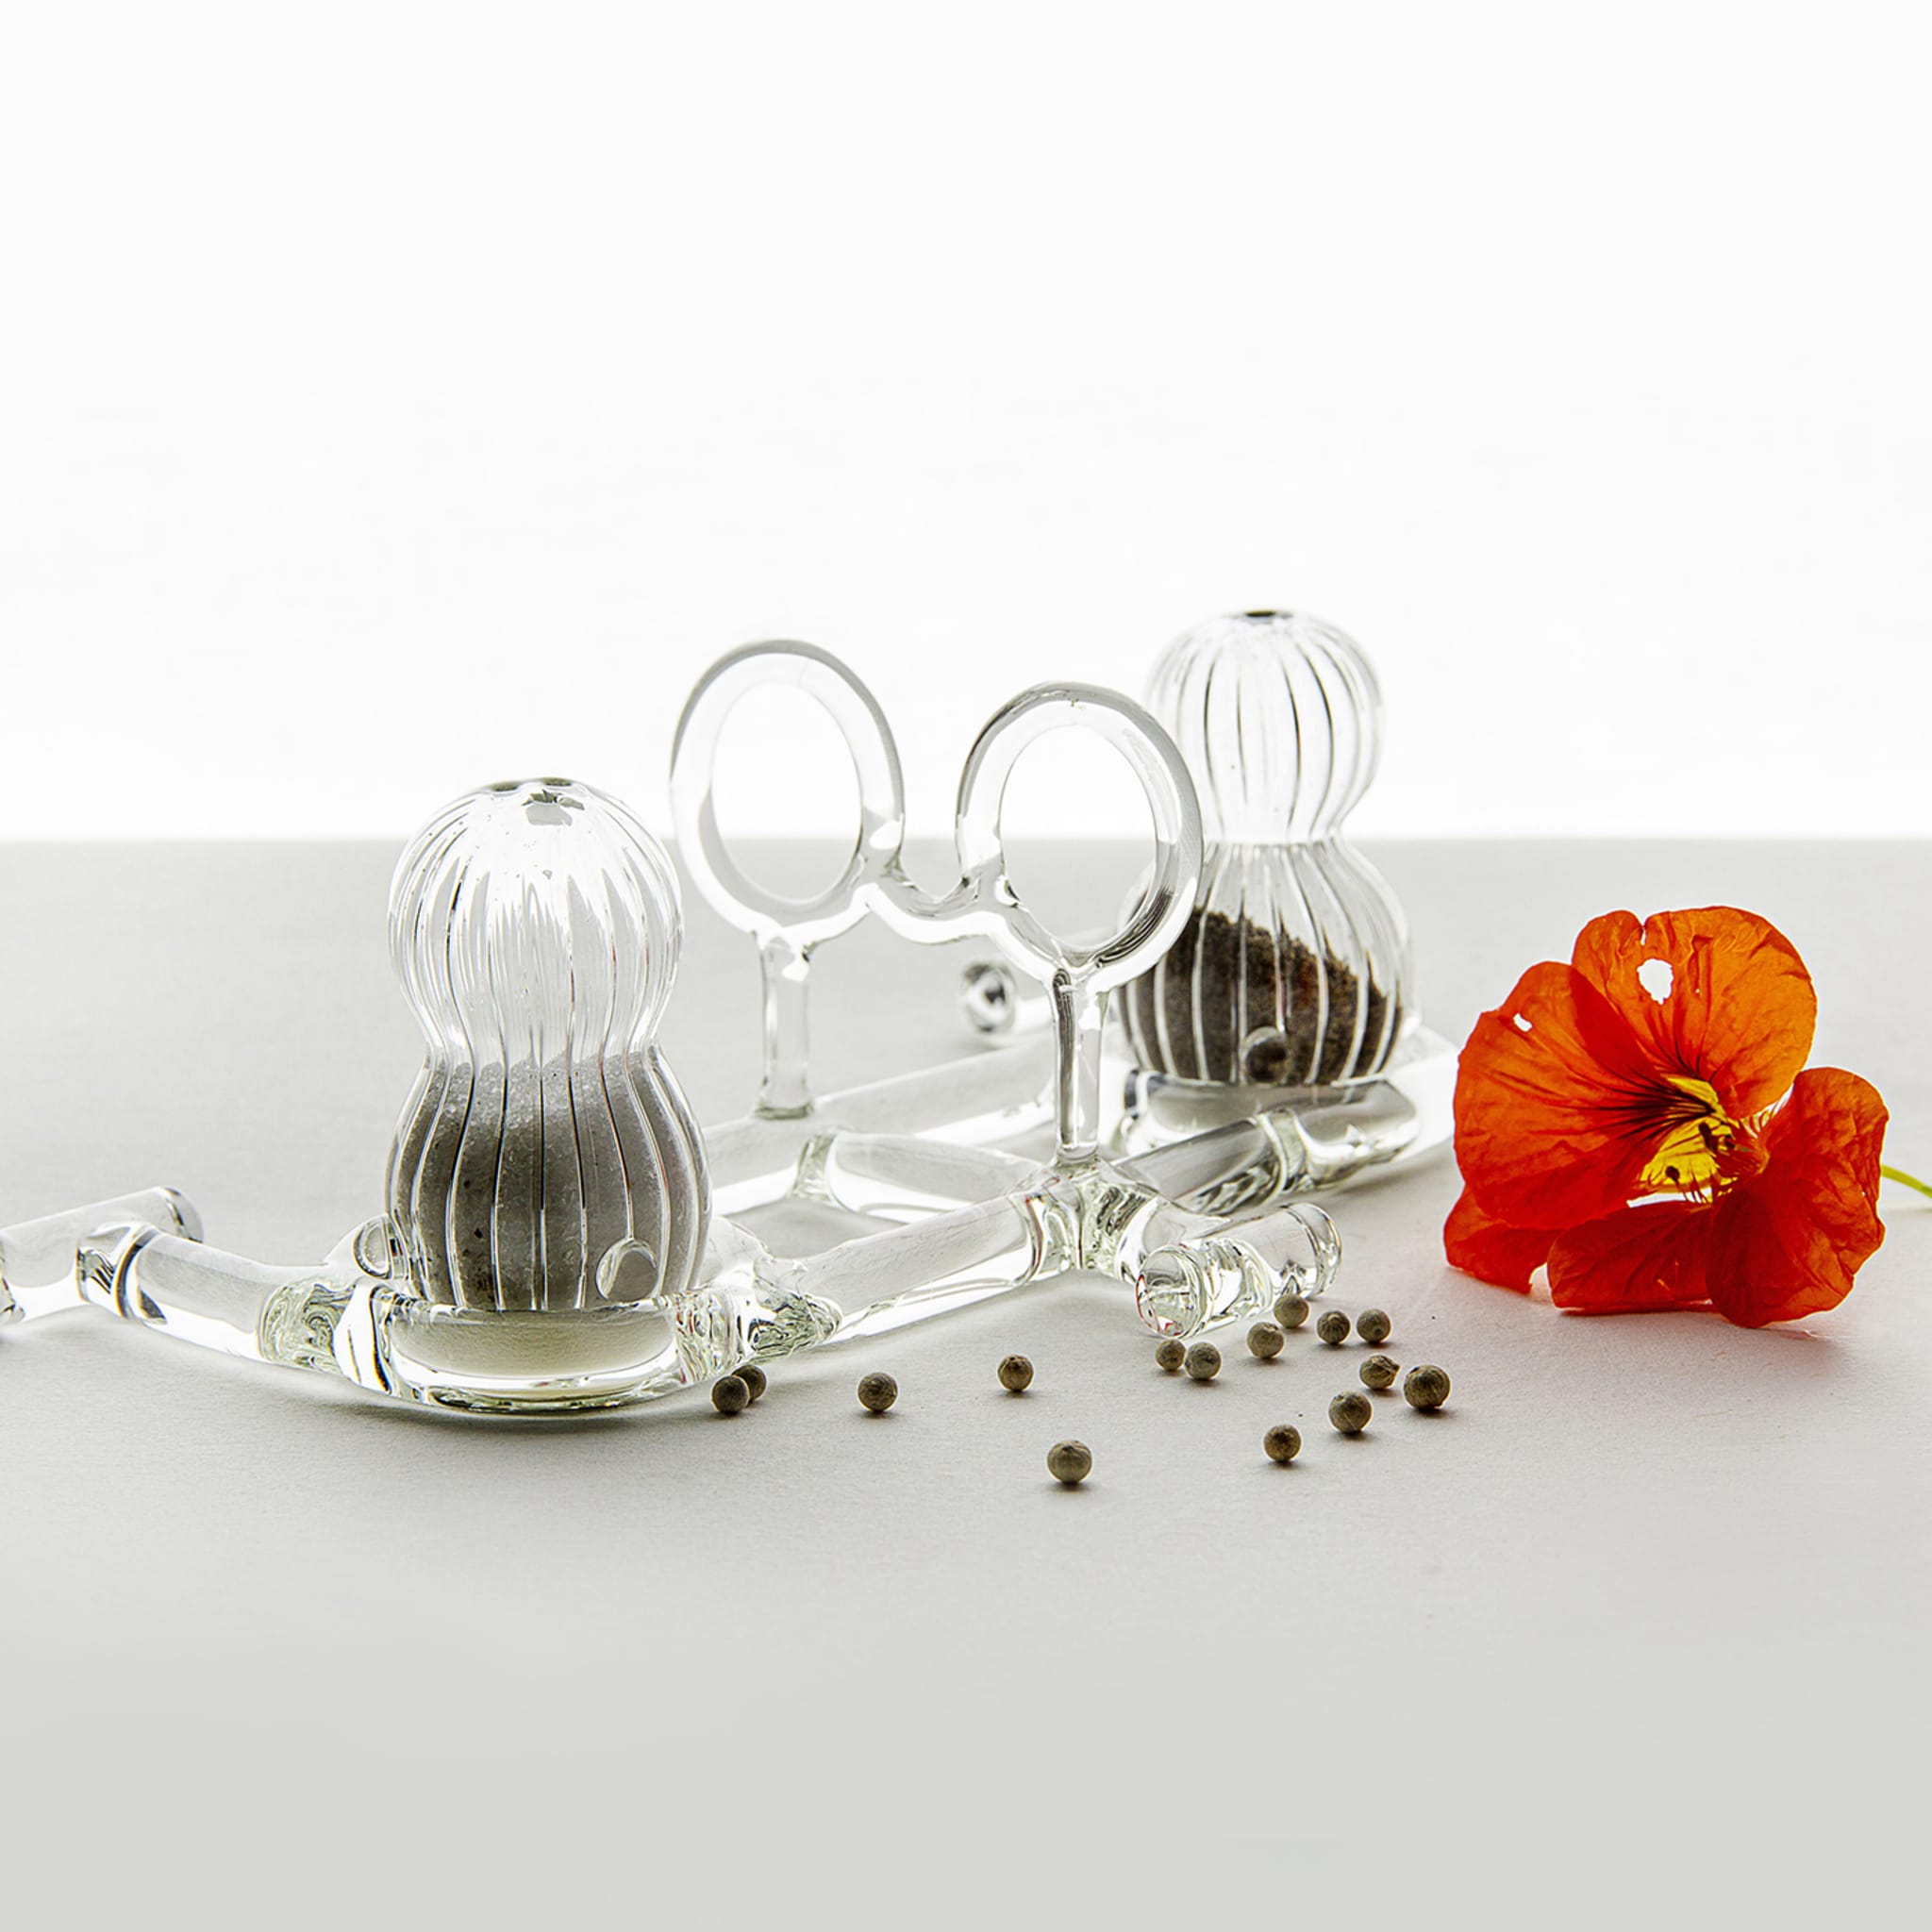 Salt & Pepper - SiO2 Tableware Glass Collection - Alternative view 3